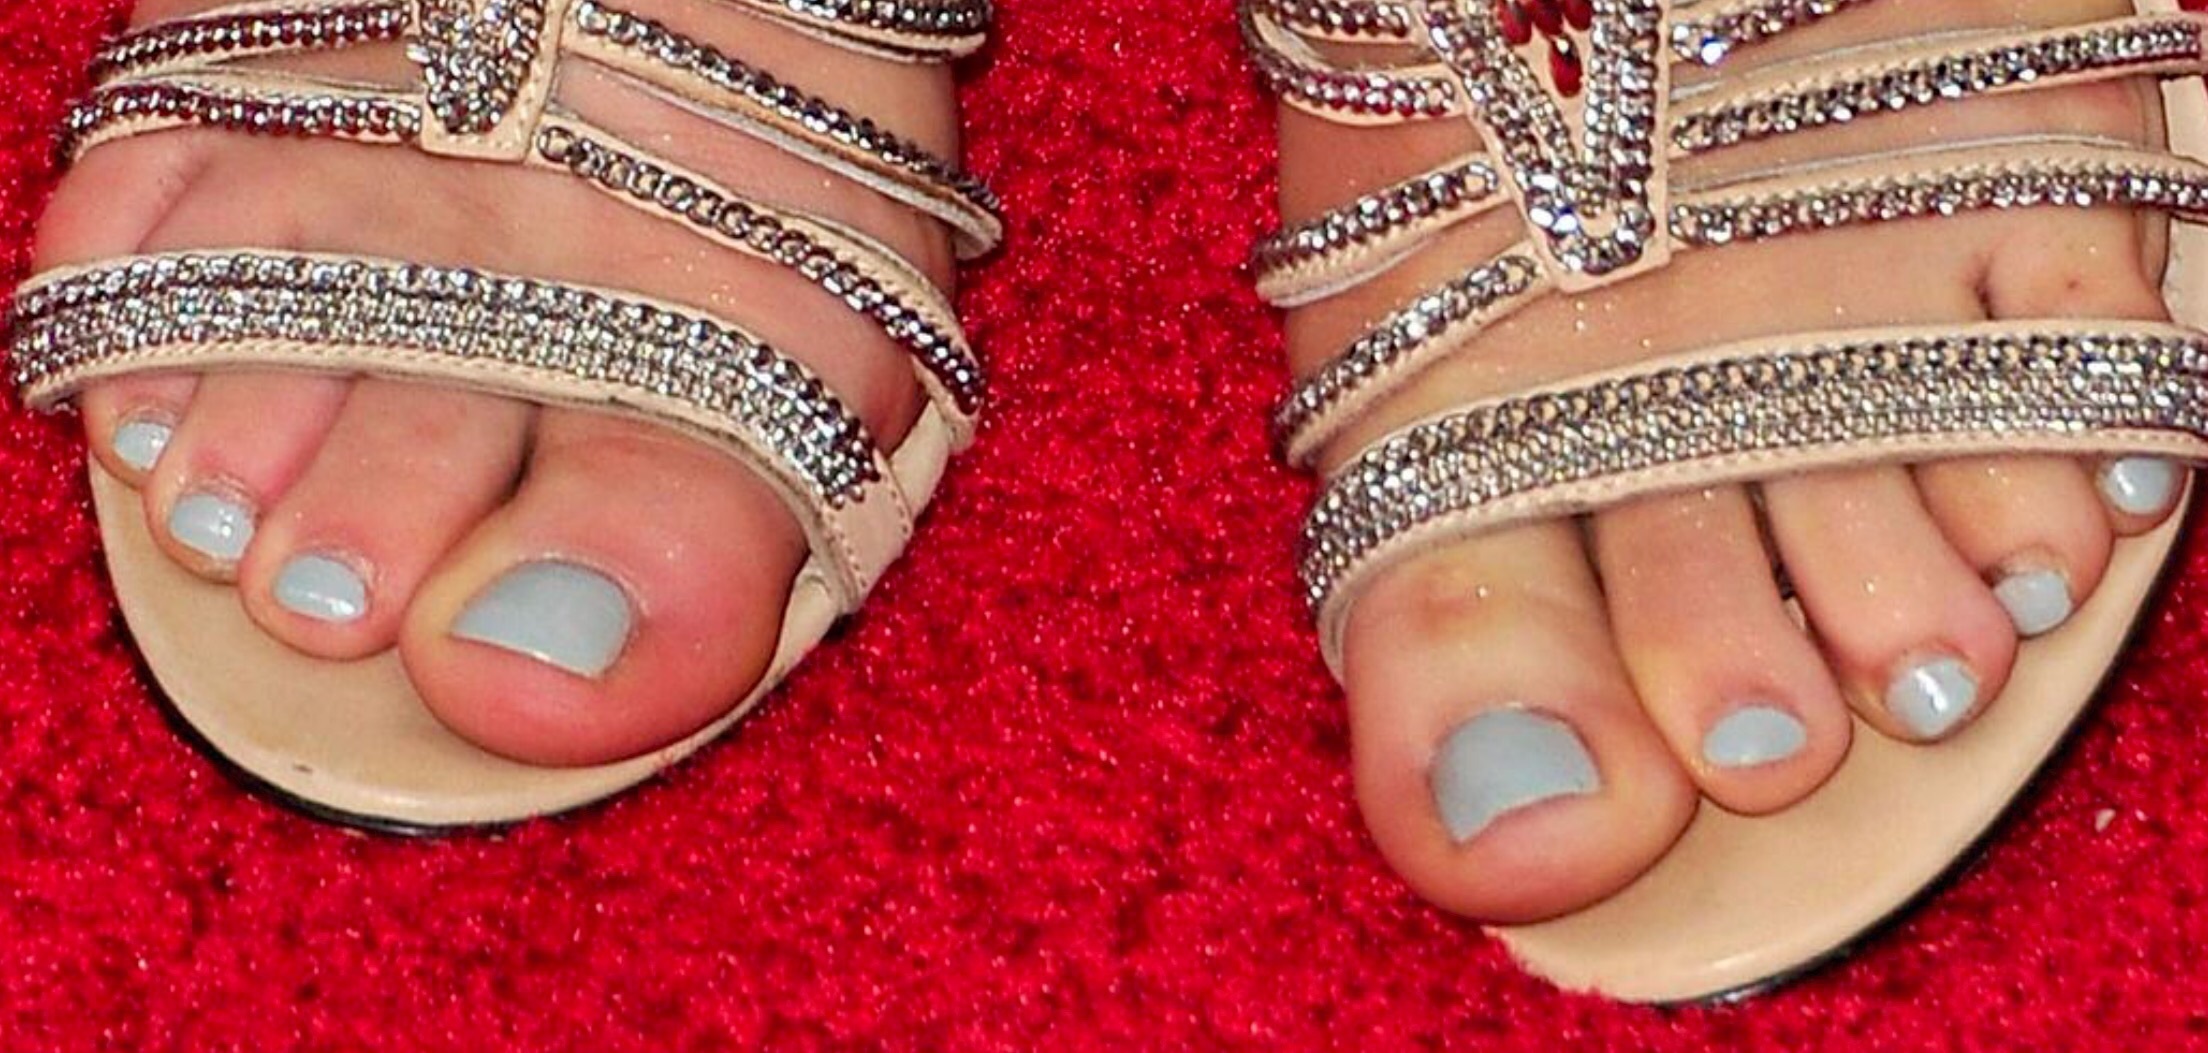 People who liked Kate Mansi's feet, also liked.